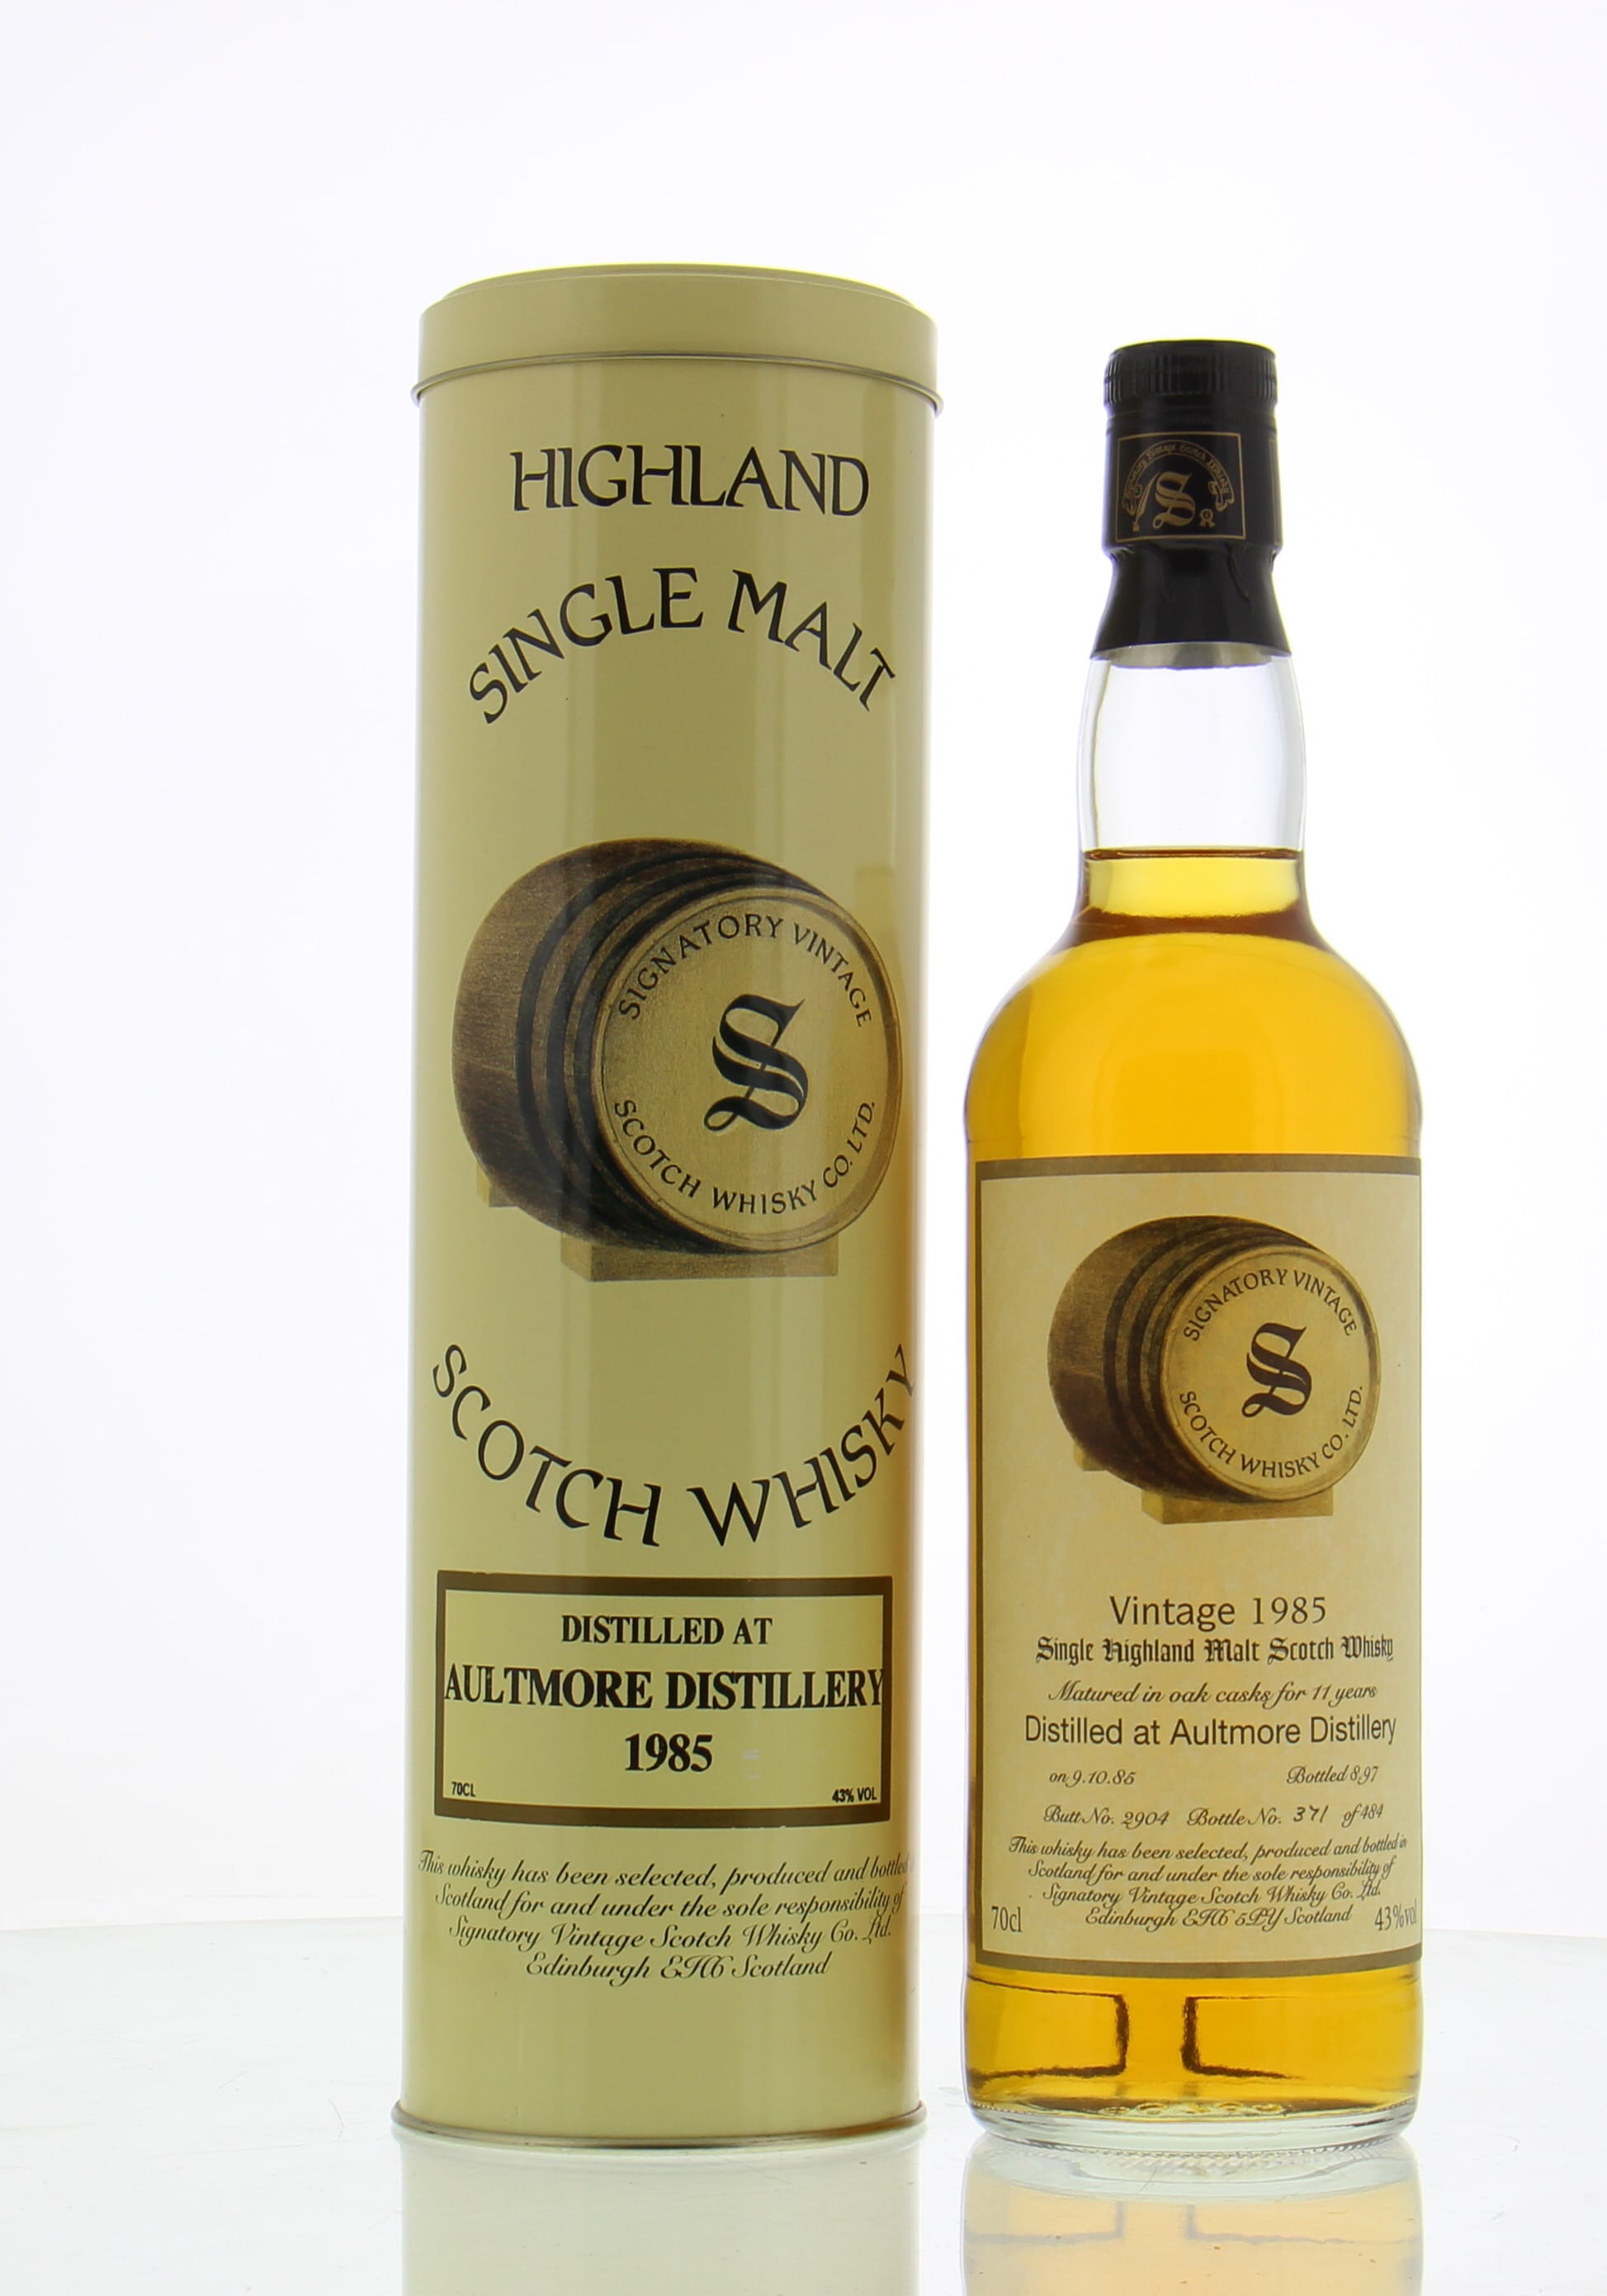 Aultmore - 11 years Old Signatory Vintage Cask:2904 43% 1985 In Original Container